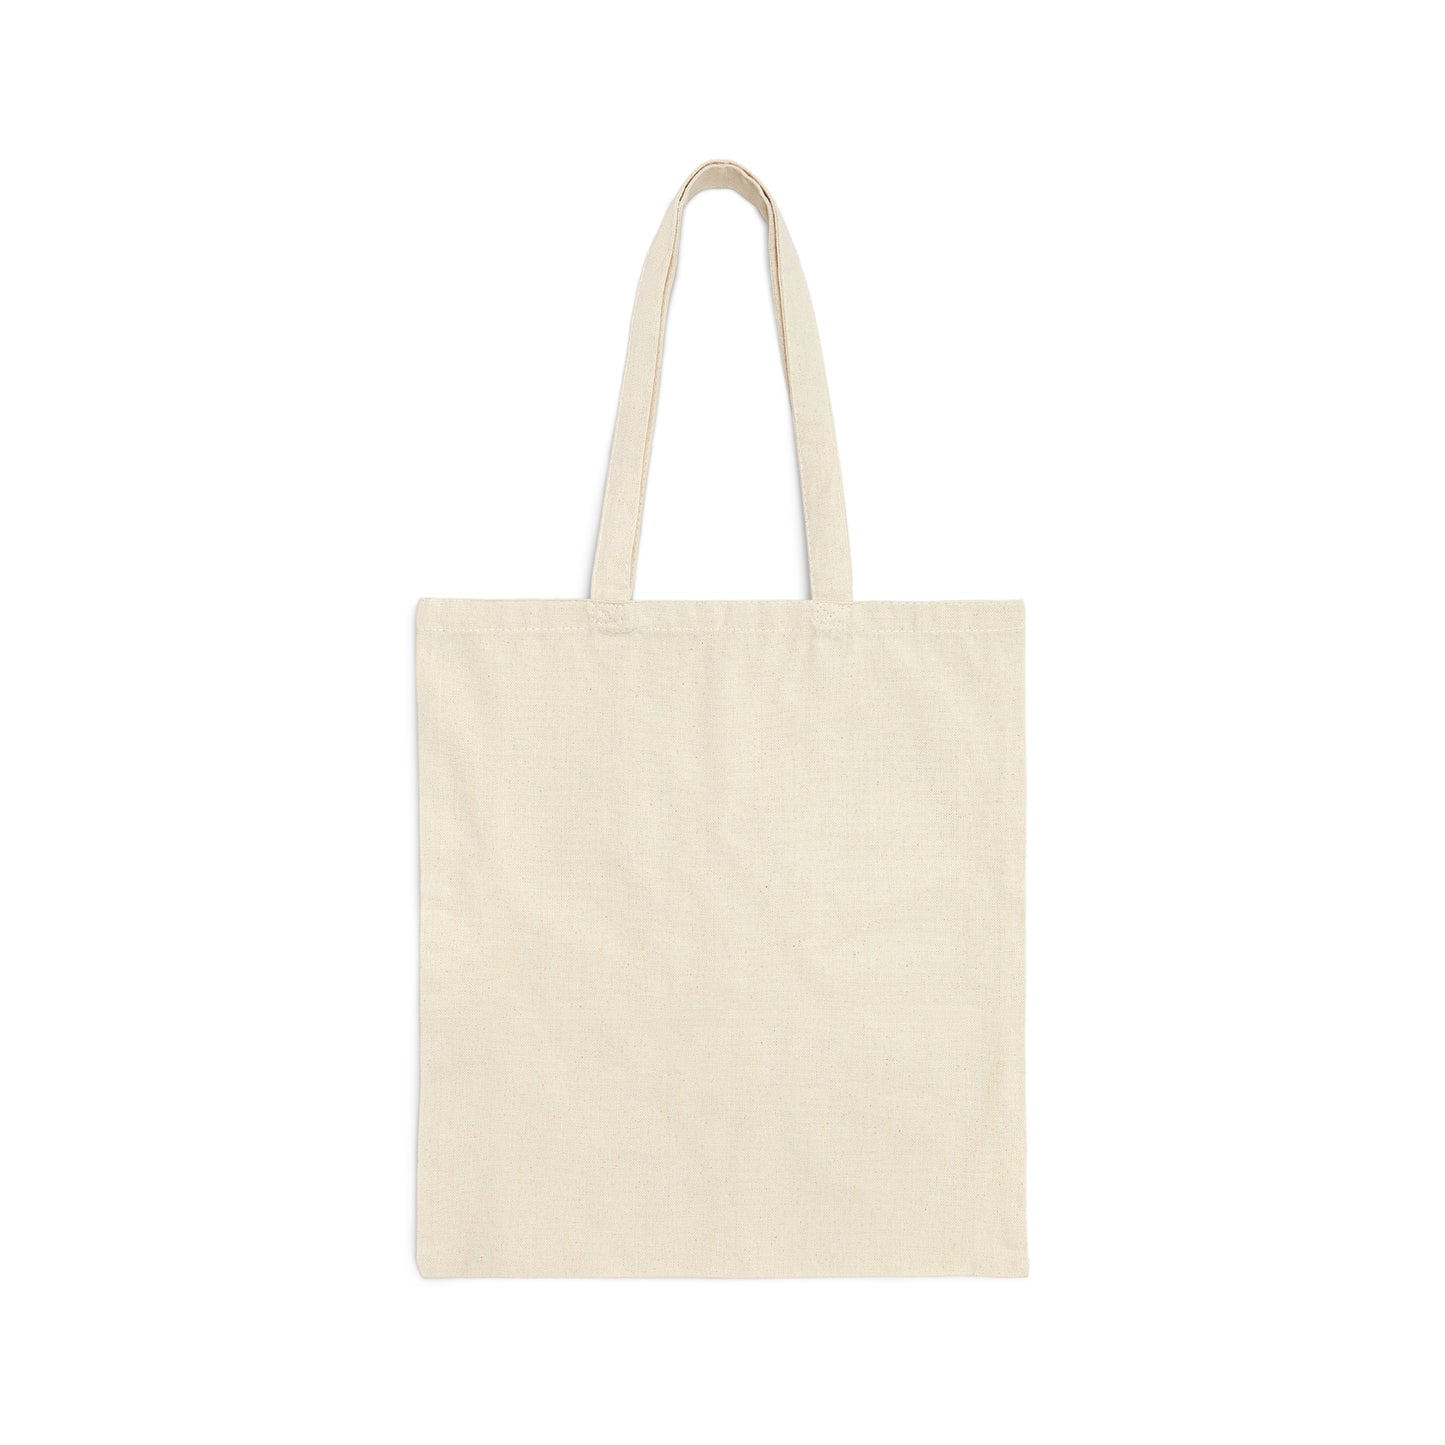 LET THERE BE ROCK VINYL Cotton Canvas Tote Bag